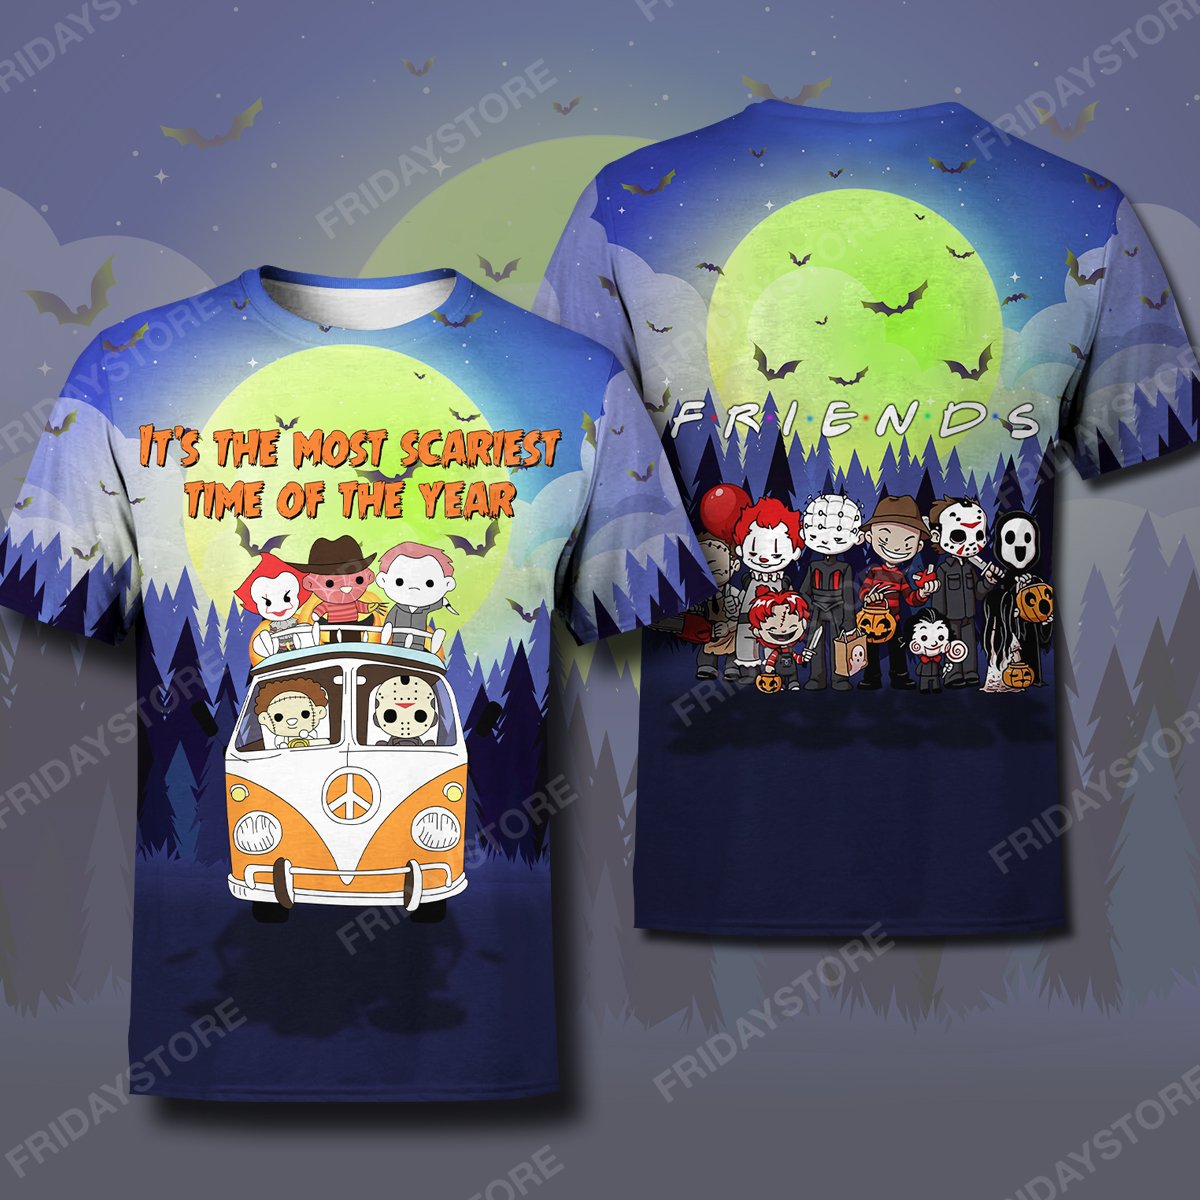 Unifinz Horror T-shirt Horror Halloween It's The Most Scariest Time Of The Year T-shirt Cool Halloween Horror Hoodie Sweater Tank 2025